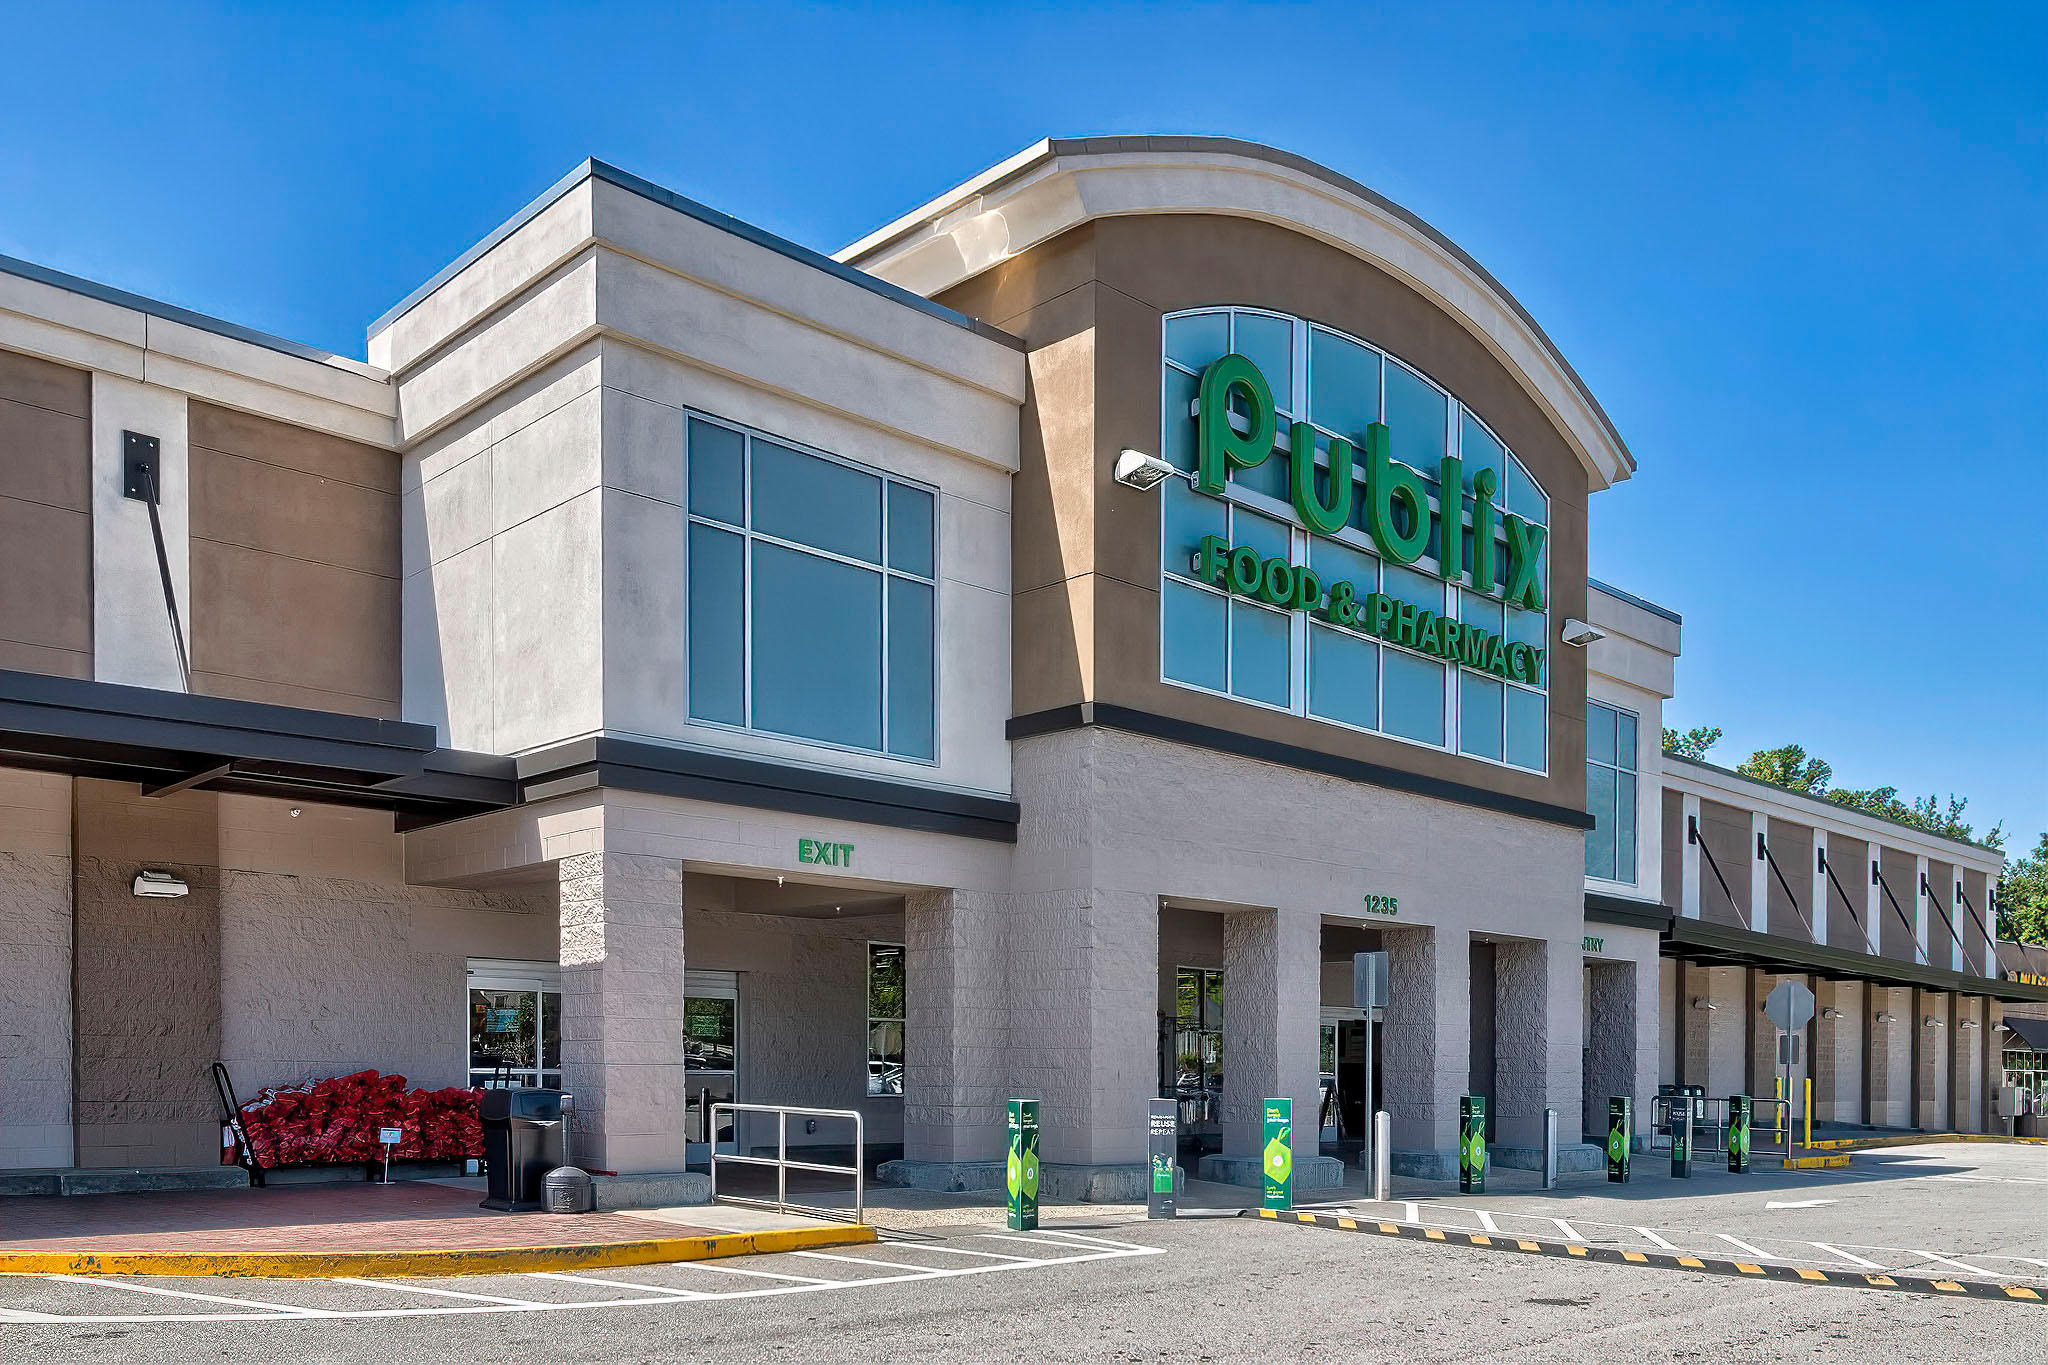 Nearby Publix shopping center for groceries and restaurants